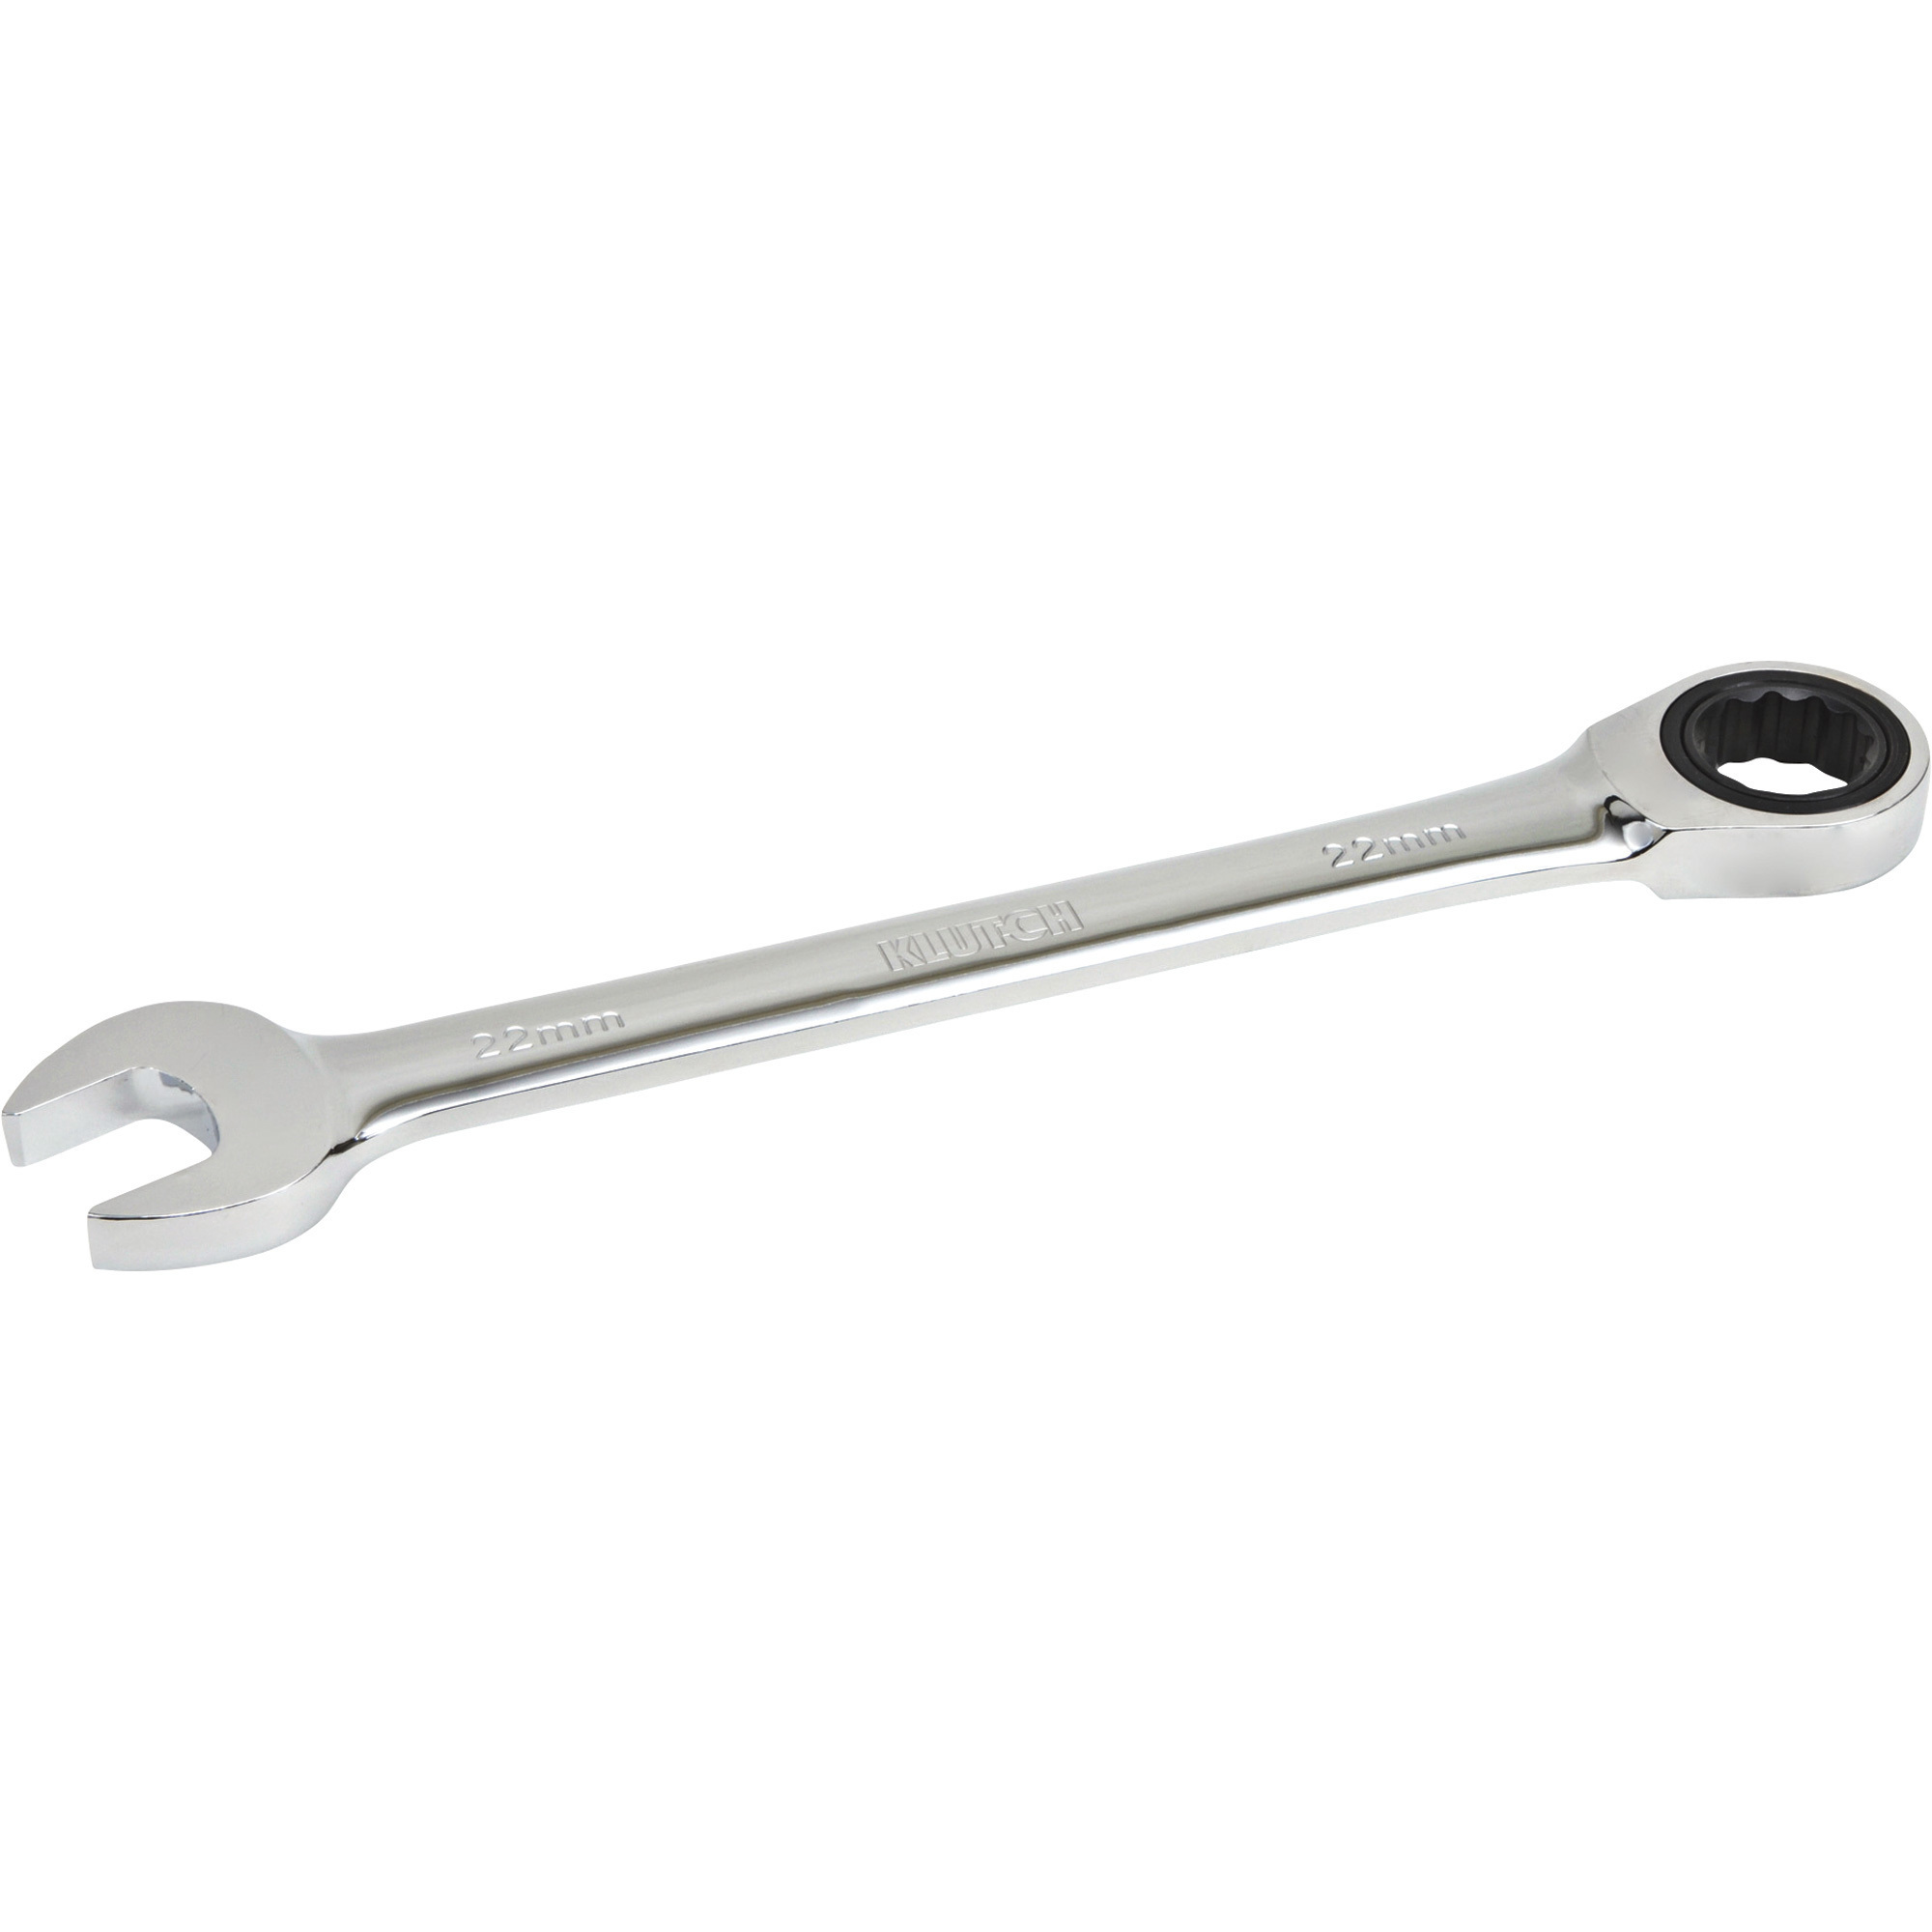 Klutch Ratcheting Wrench, Metric, 22mm